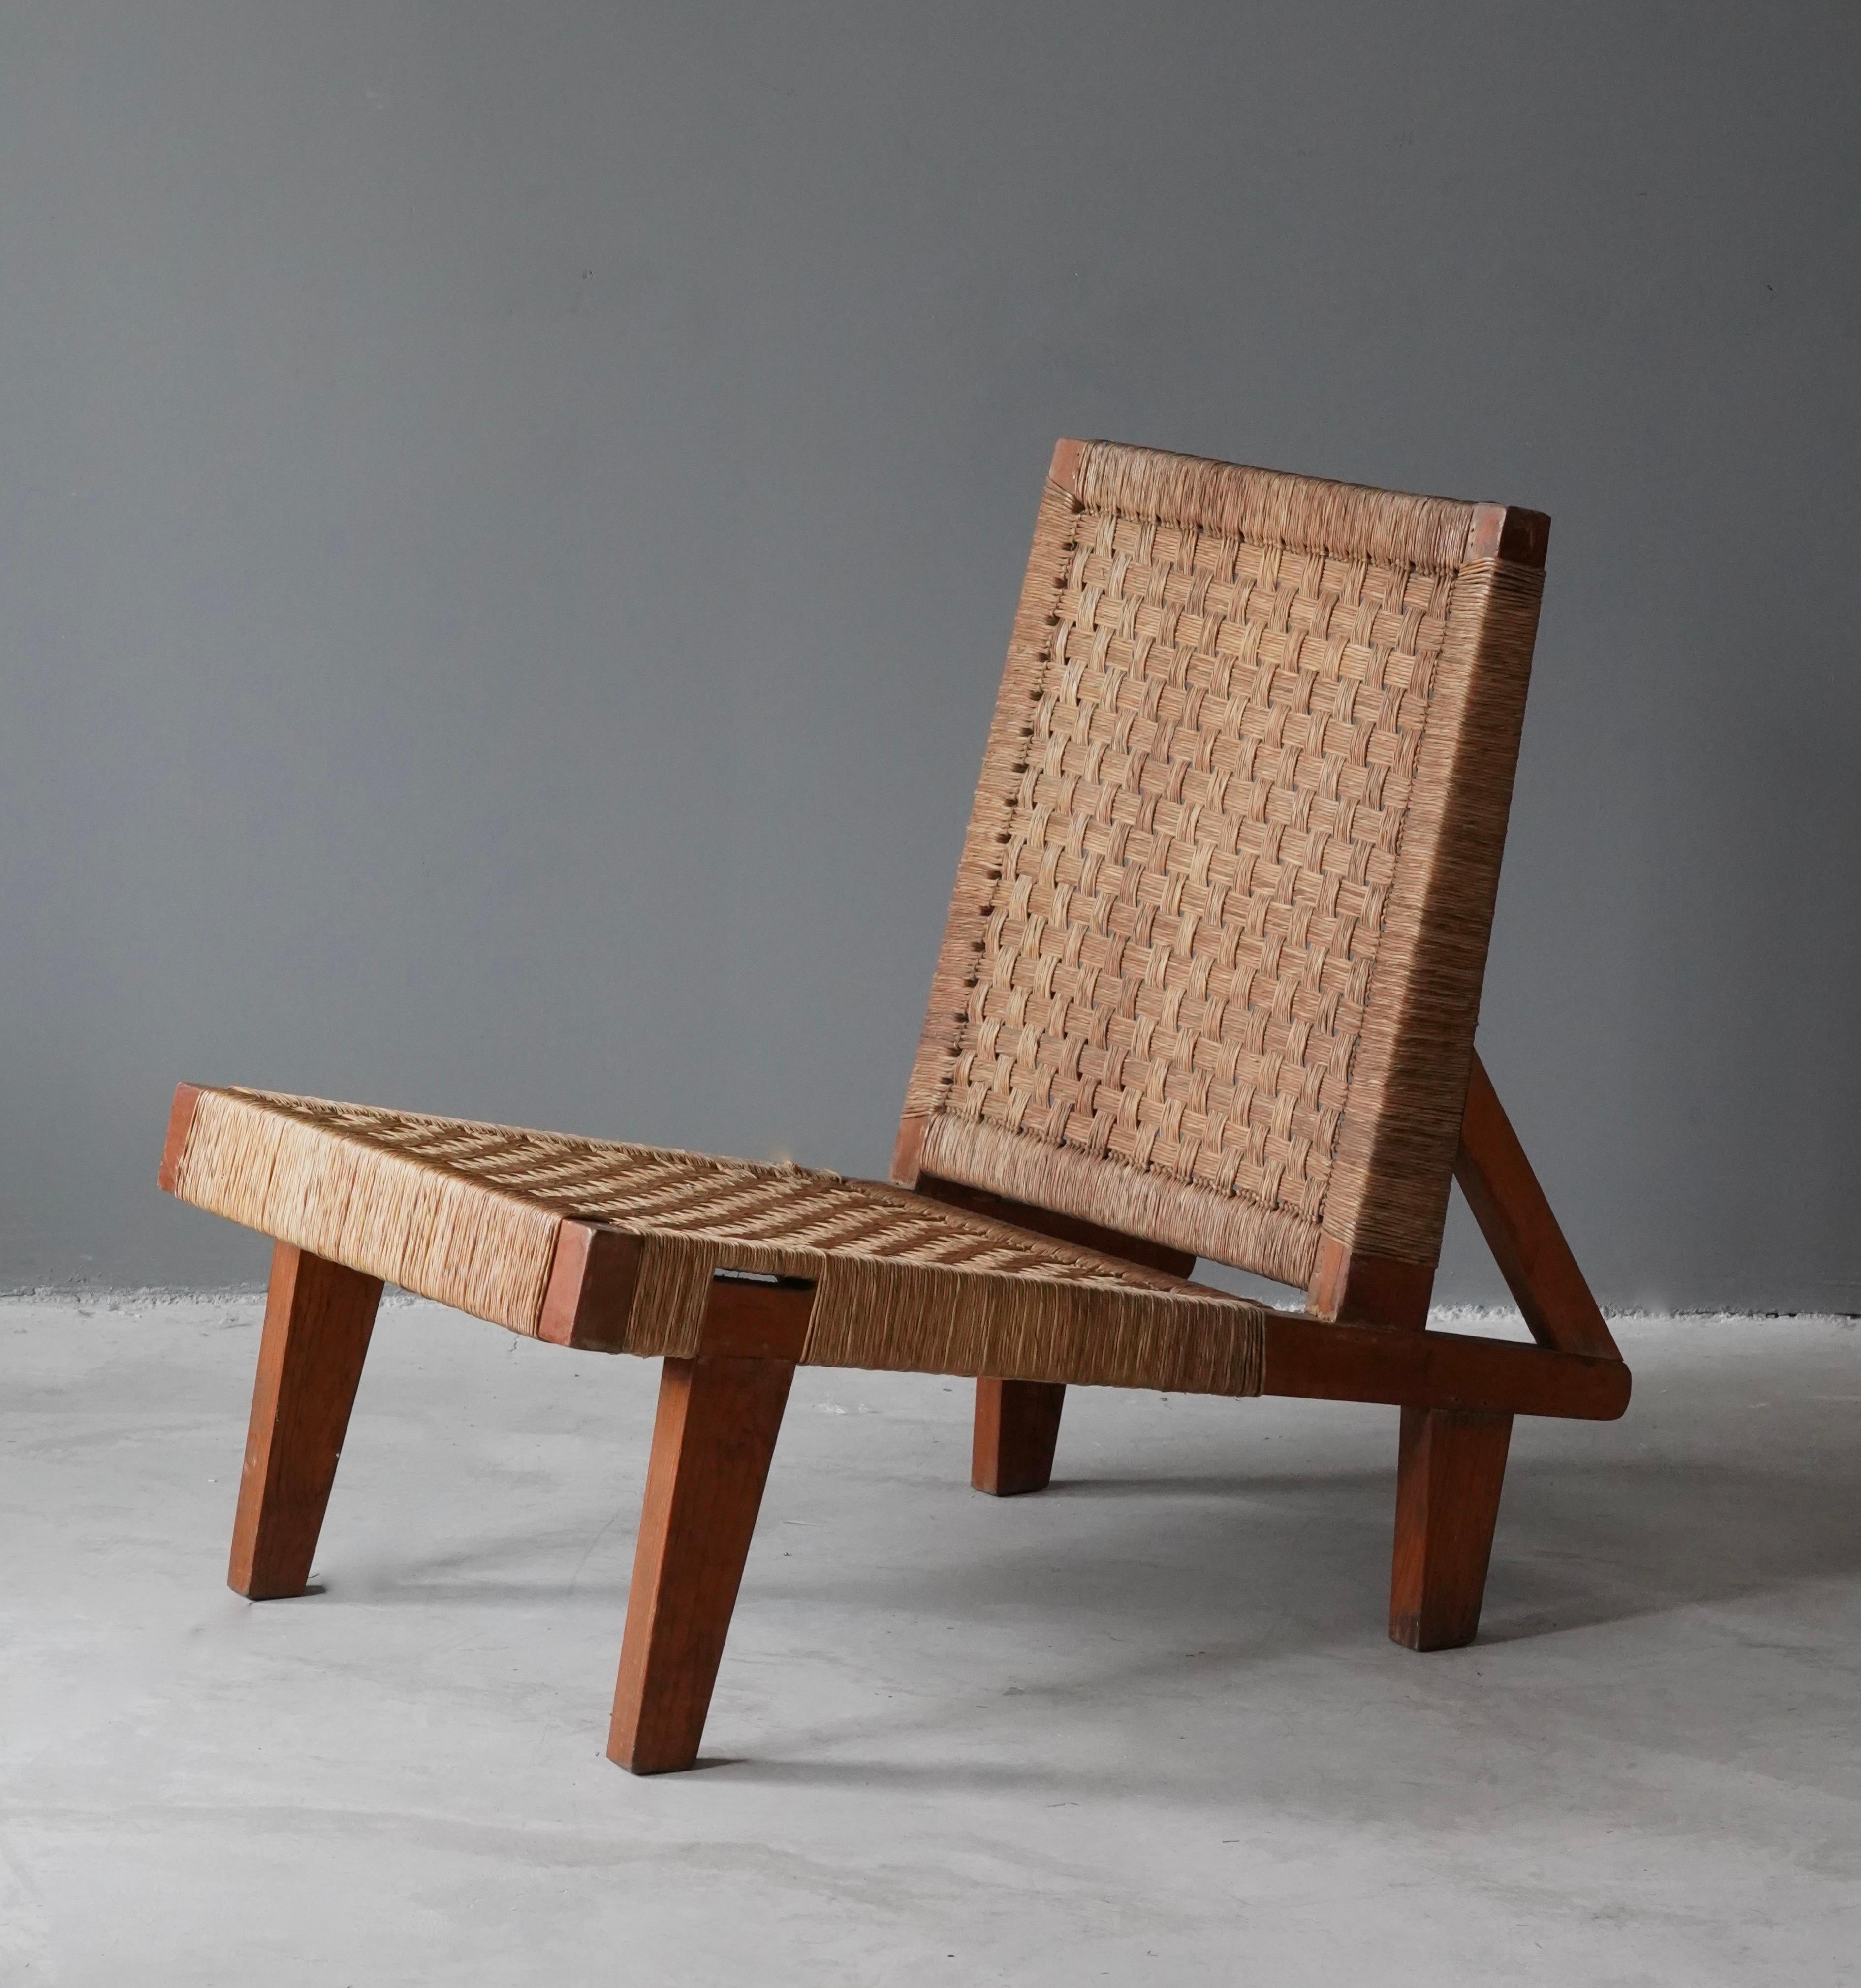 A lounge chair / slipper chair. Walnut and original woven rattan / cane seat and back.

Other notable American designers of the era include Edward Wormley, Harvey Probber, T.H. Robsjohn Gibbings.






 